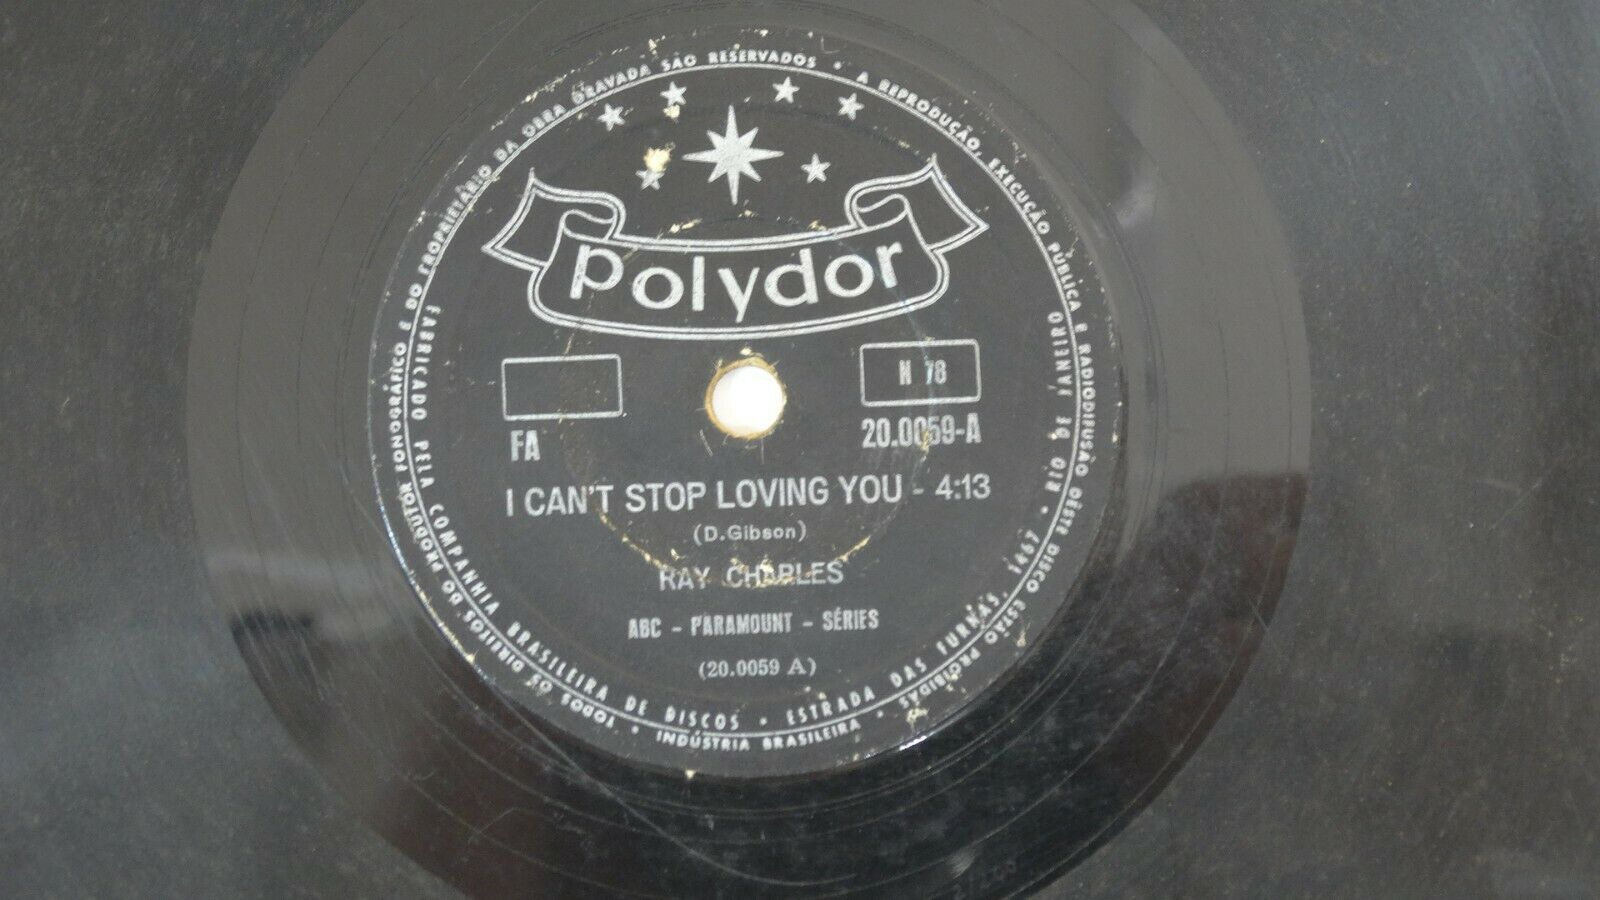 Pic 3 RAY CHARLES - "I Can't Stop Loving You/ Bye Bye Love" 78 RPM BRAZIL 1961